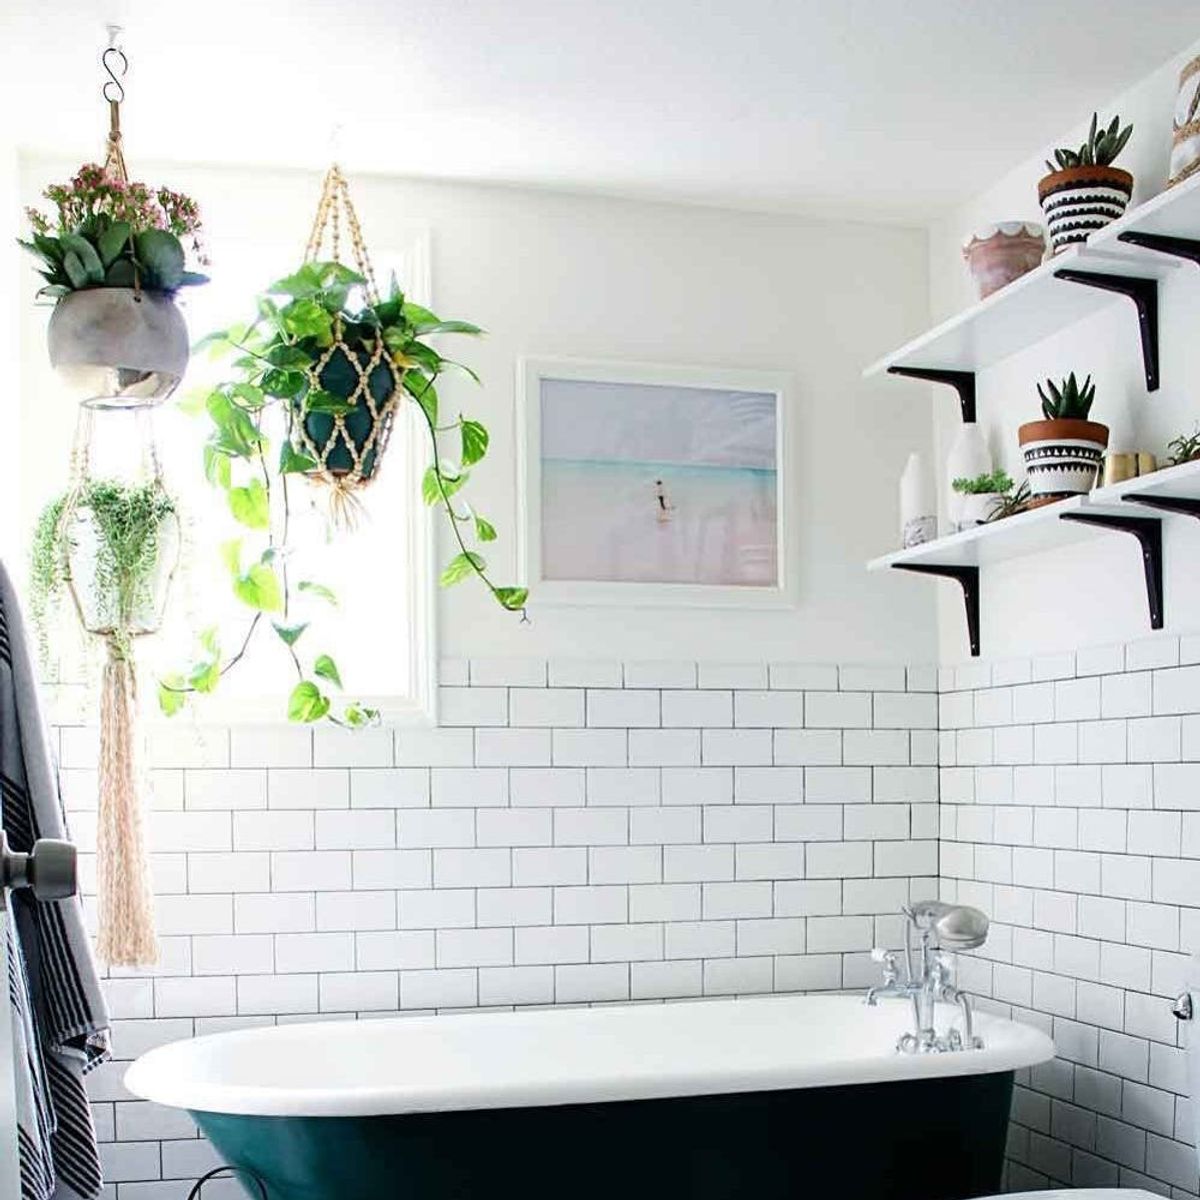 Here’s the Latest Low-Maintenance Plant Trend Taking Over Pinterest